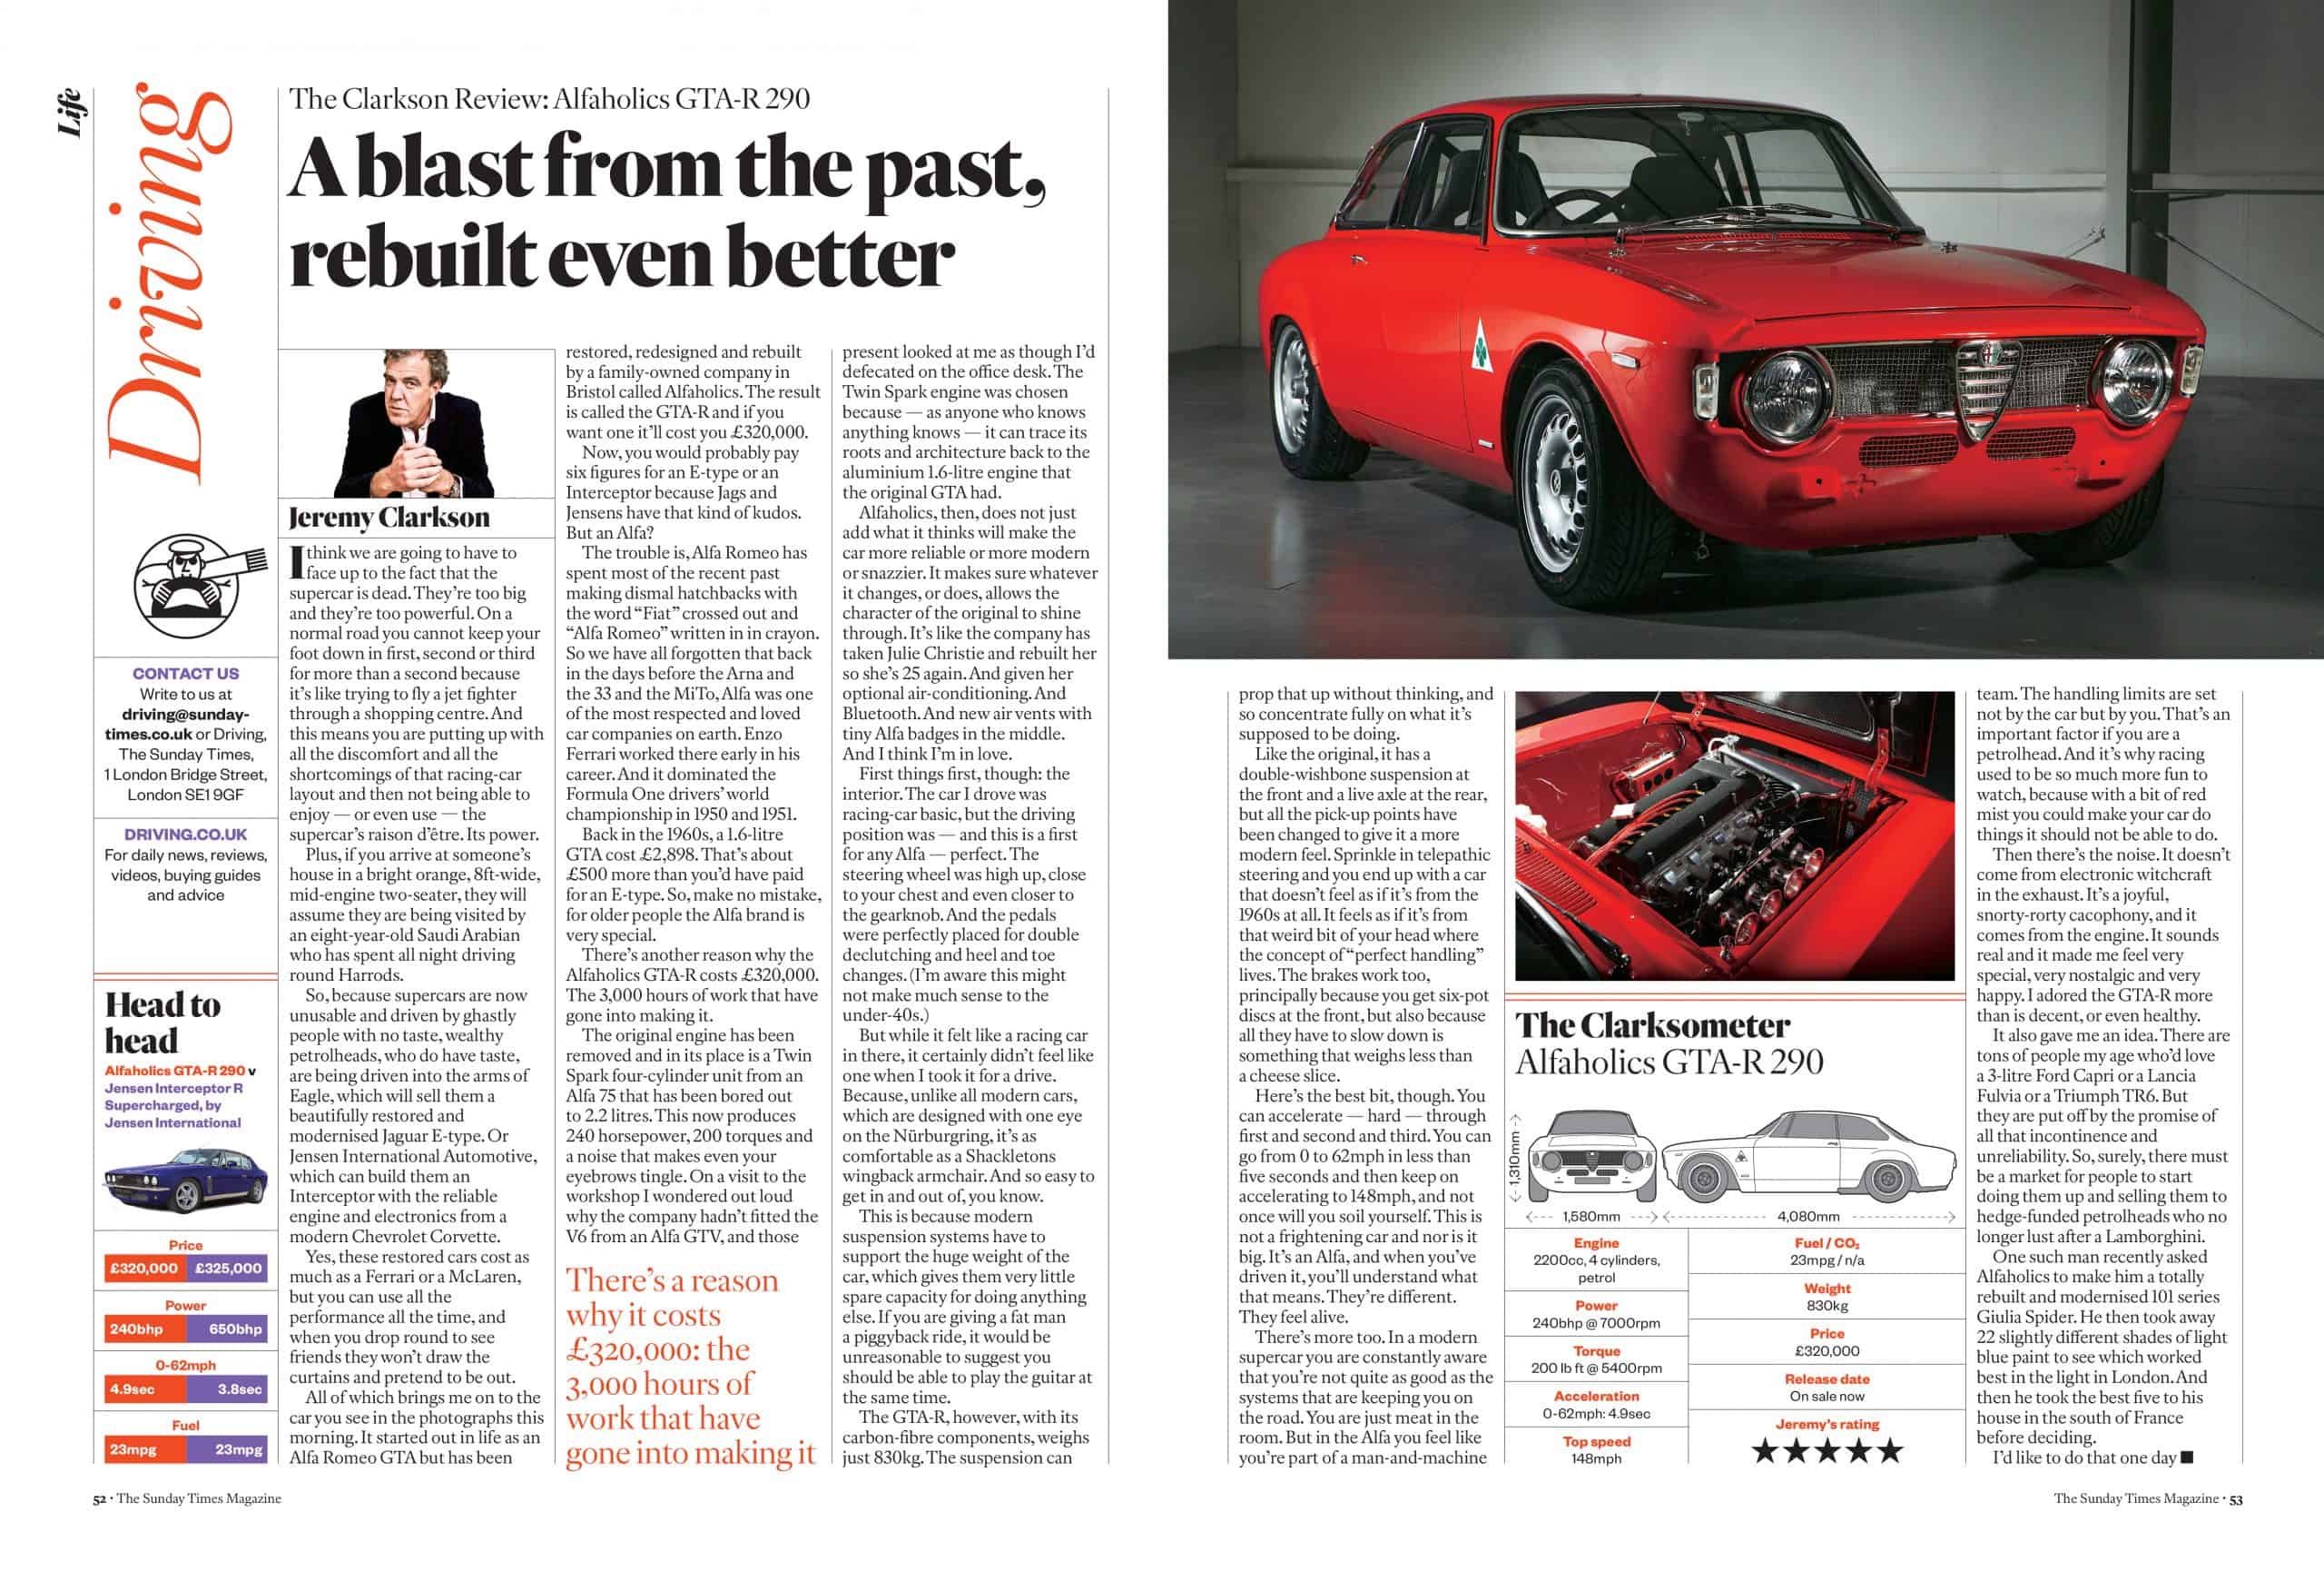 The Clarkson Review: Alfaholics GTA-R 290